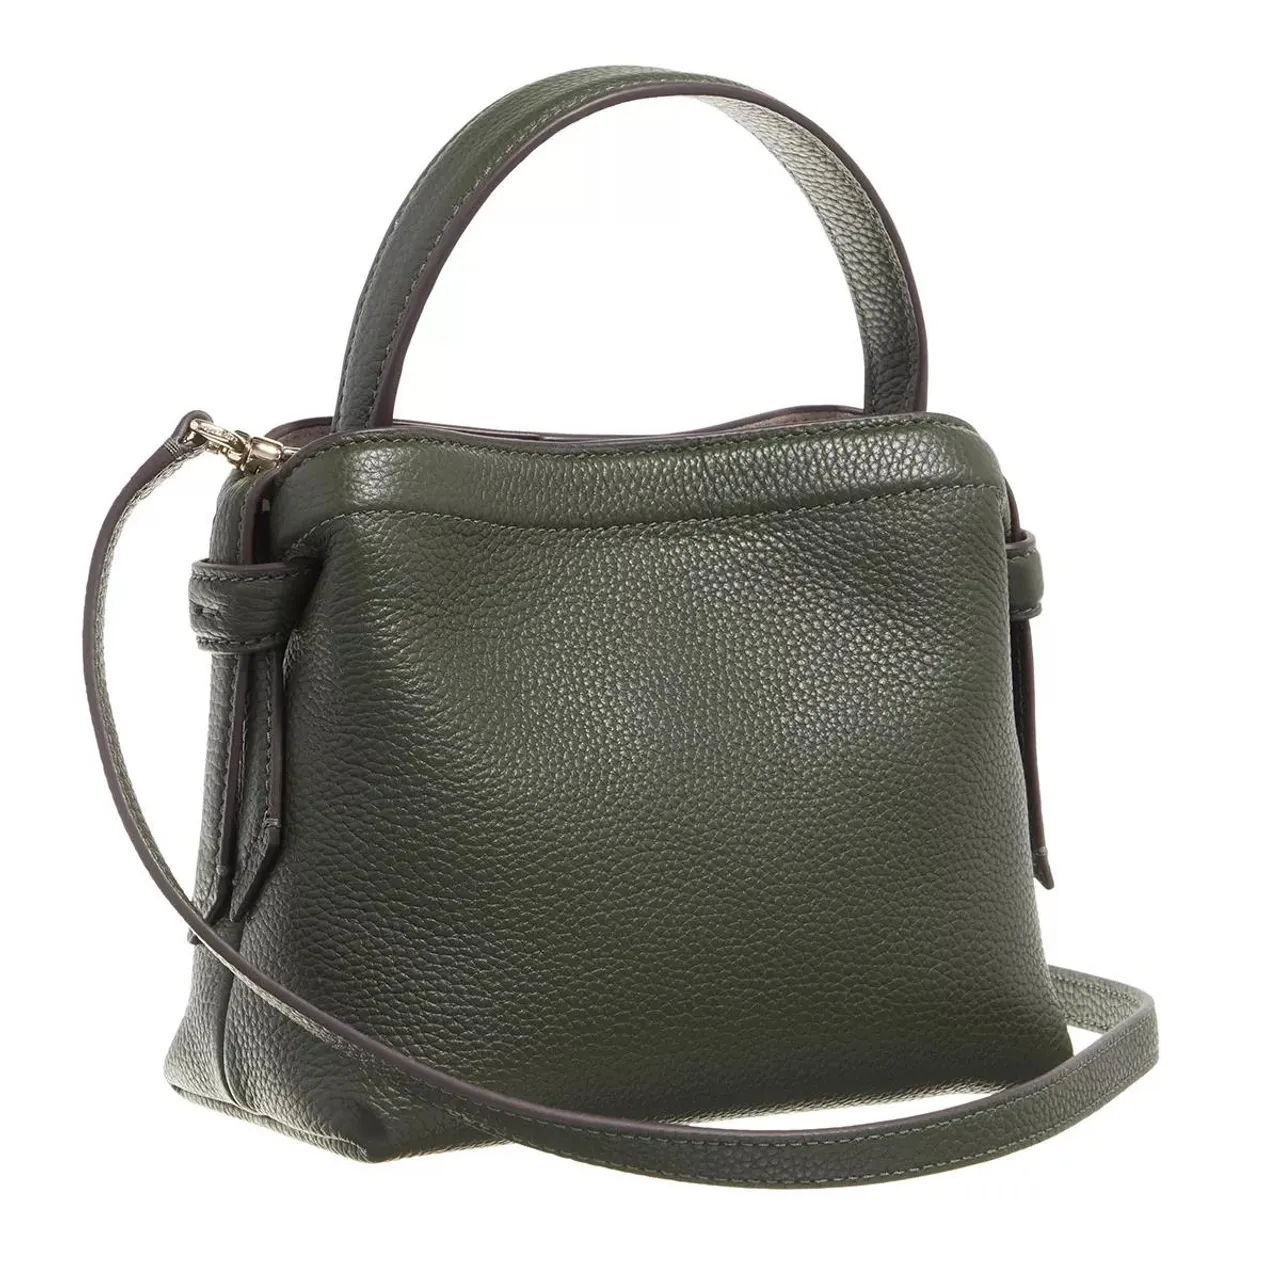 Kate Spade New York Crossbody Bags - Knott Pebbled Leather - green - Crossbody Bags for ladies